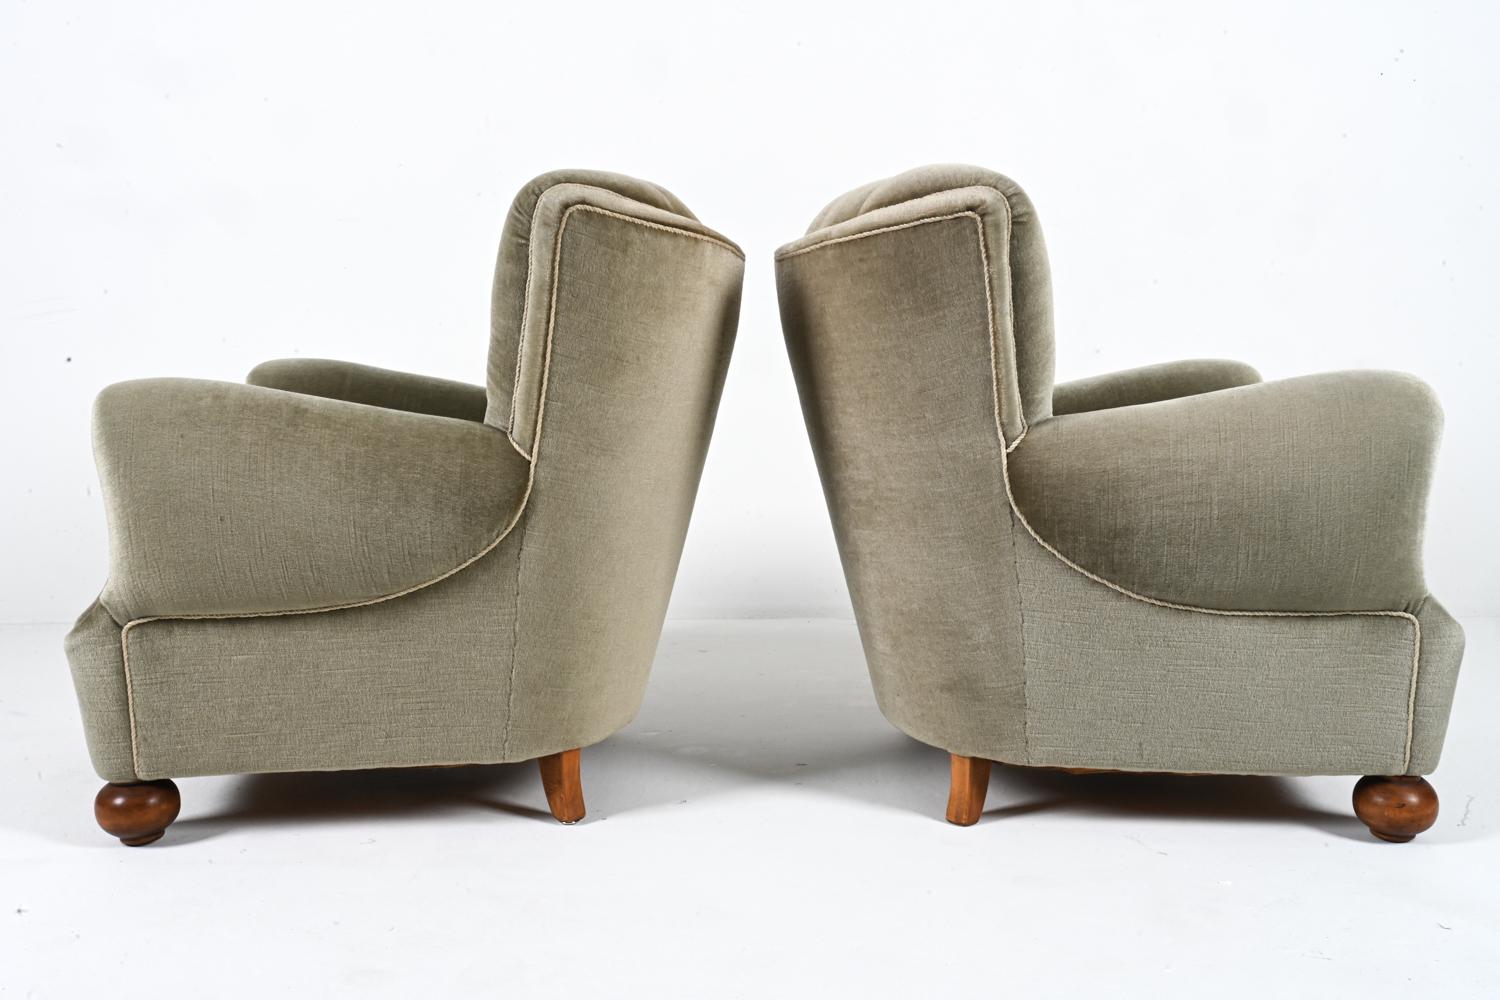 Pair of European Roll-Arm Club Chairs in Mohair and Beech, c. 1940's For Sale 7